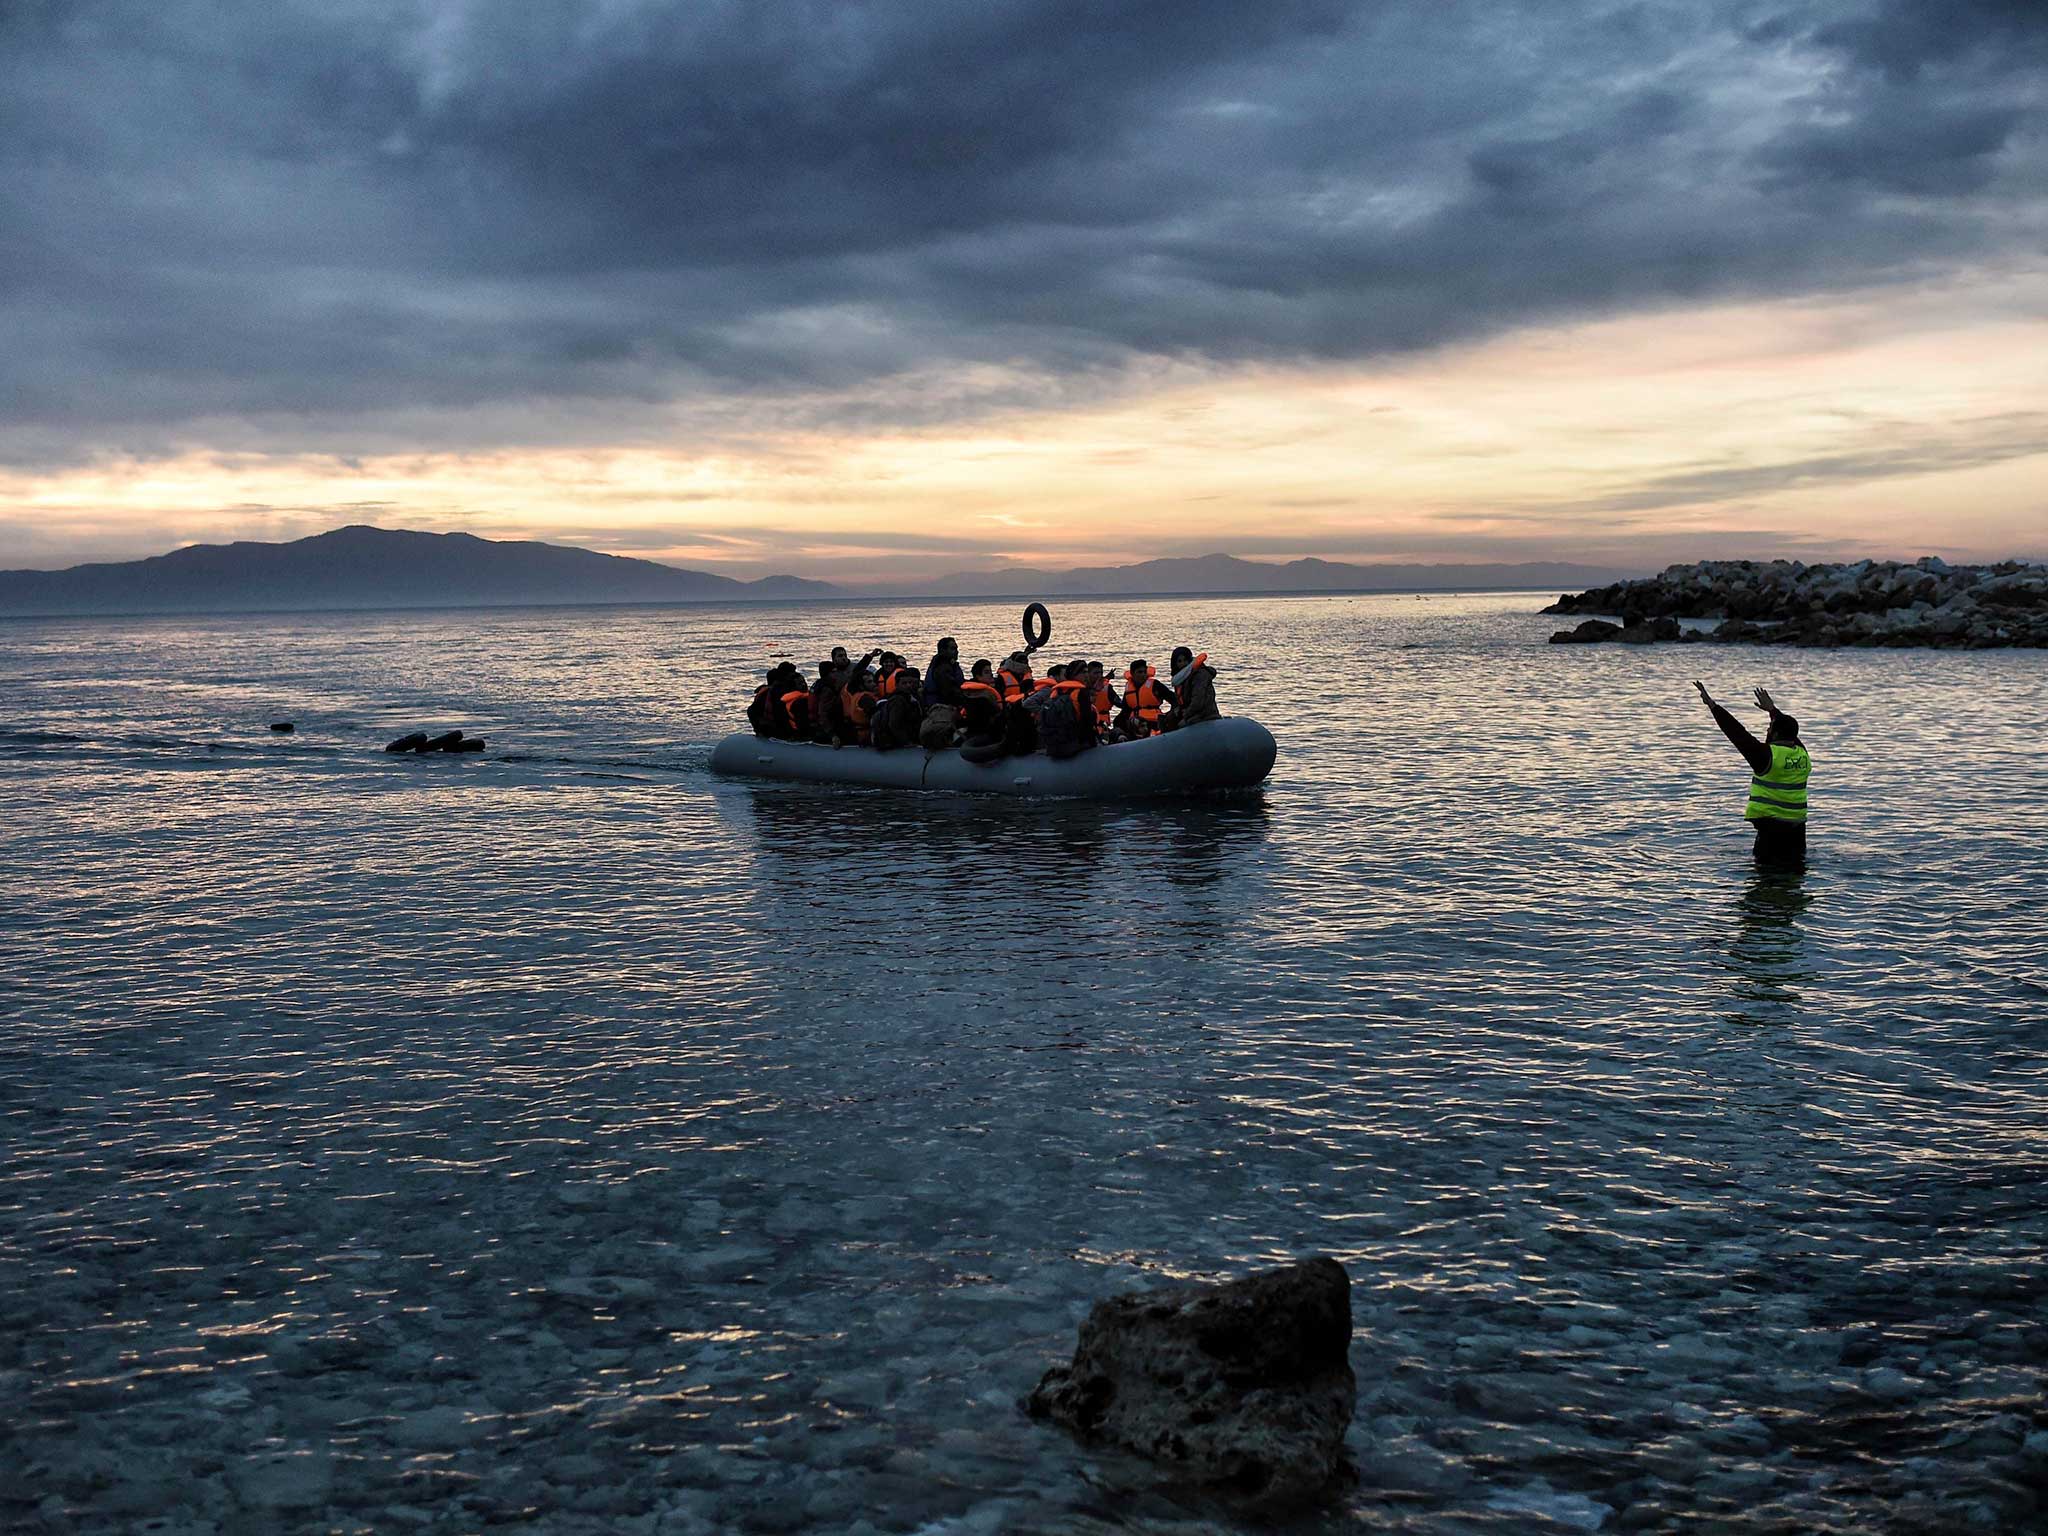 Refugees massed onto an inflatable boat reaching Mytilene, northern island of Lesbos, after crossing the Aegean sea from Turkey, on 17 February, 2016